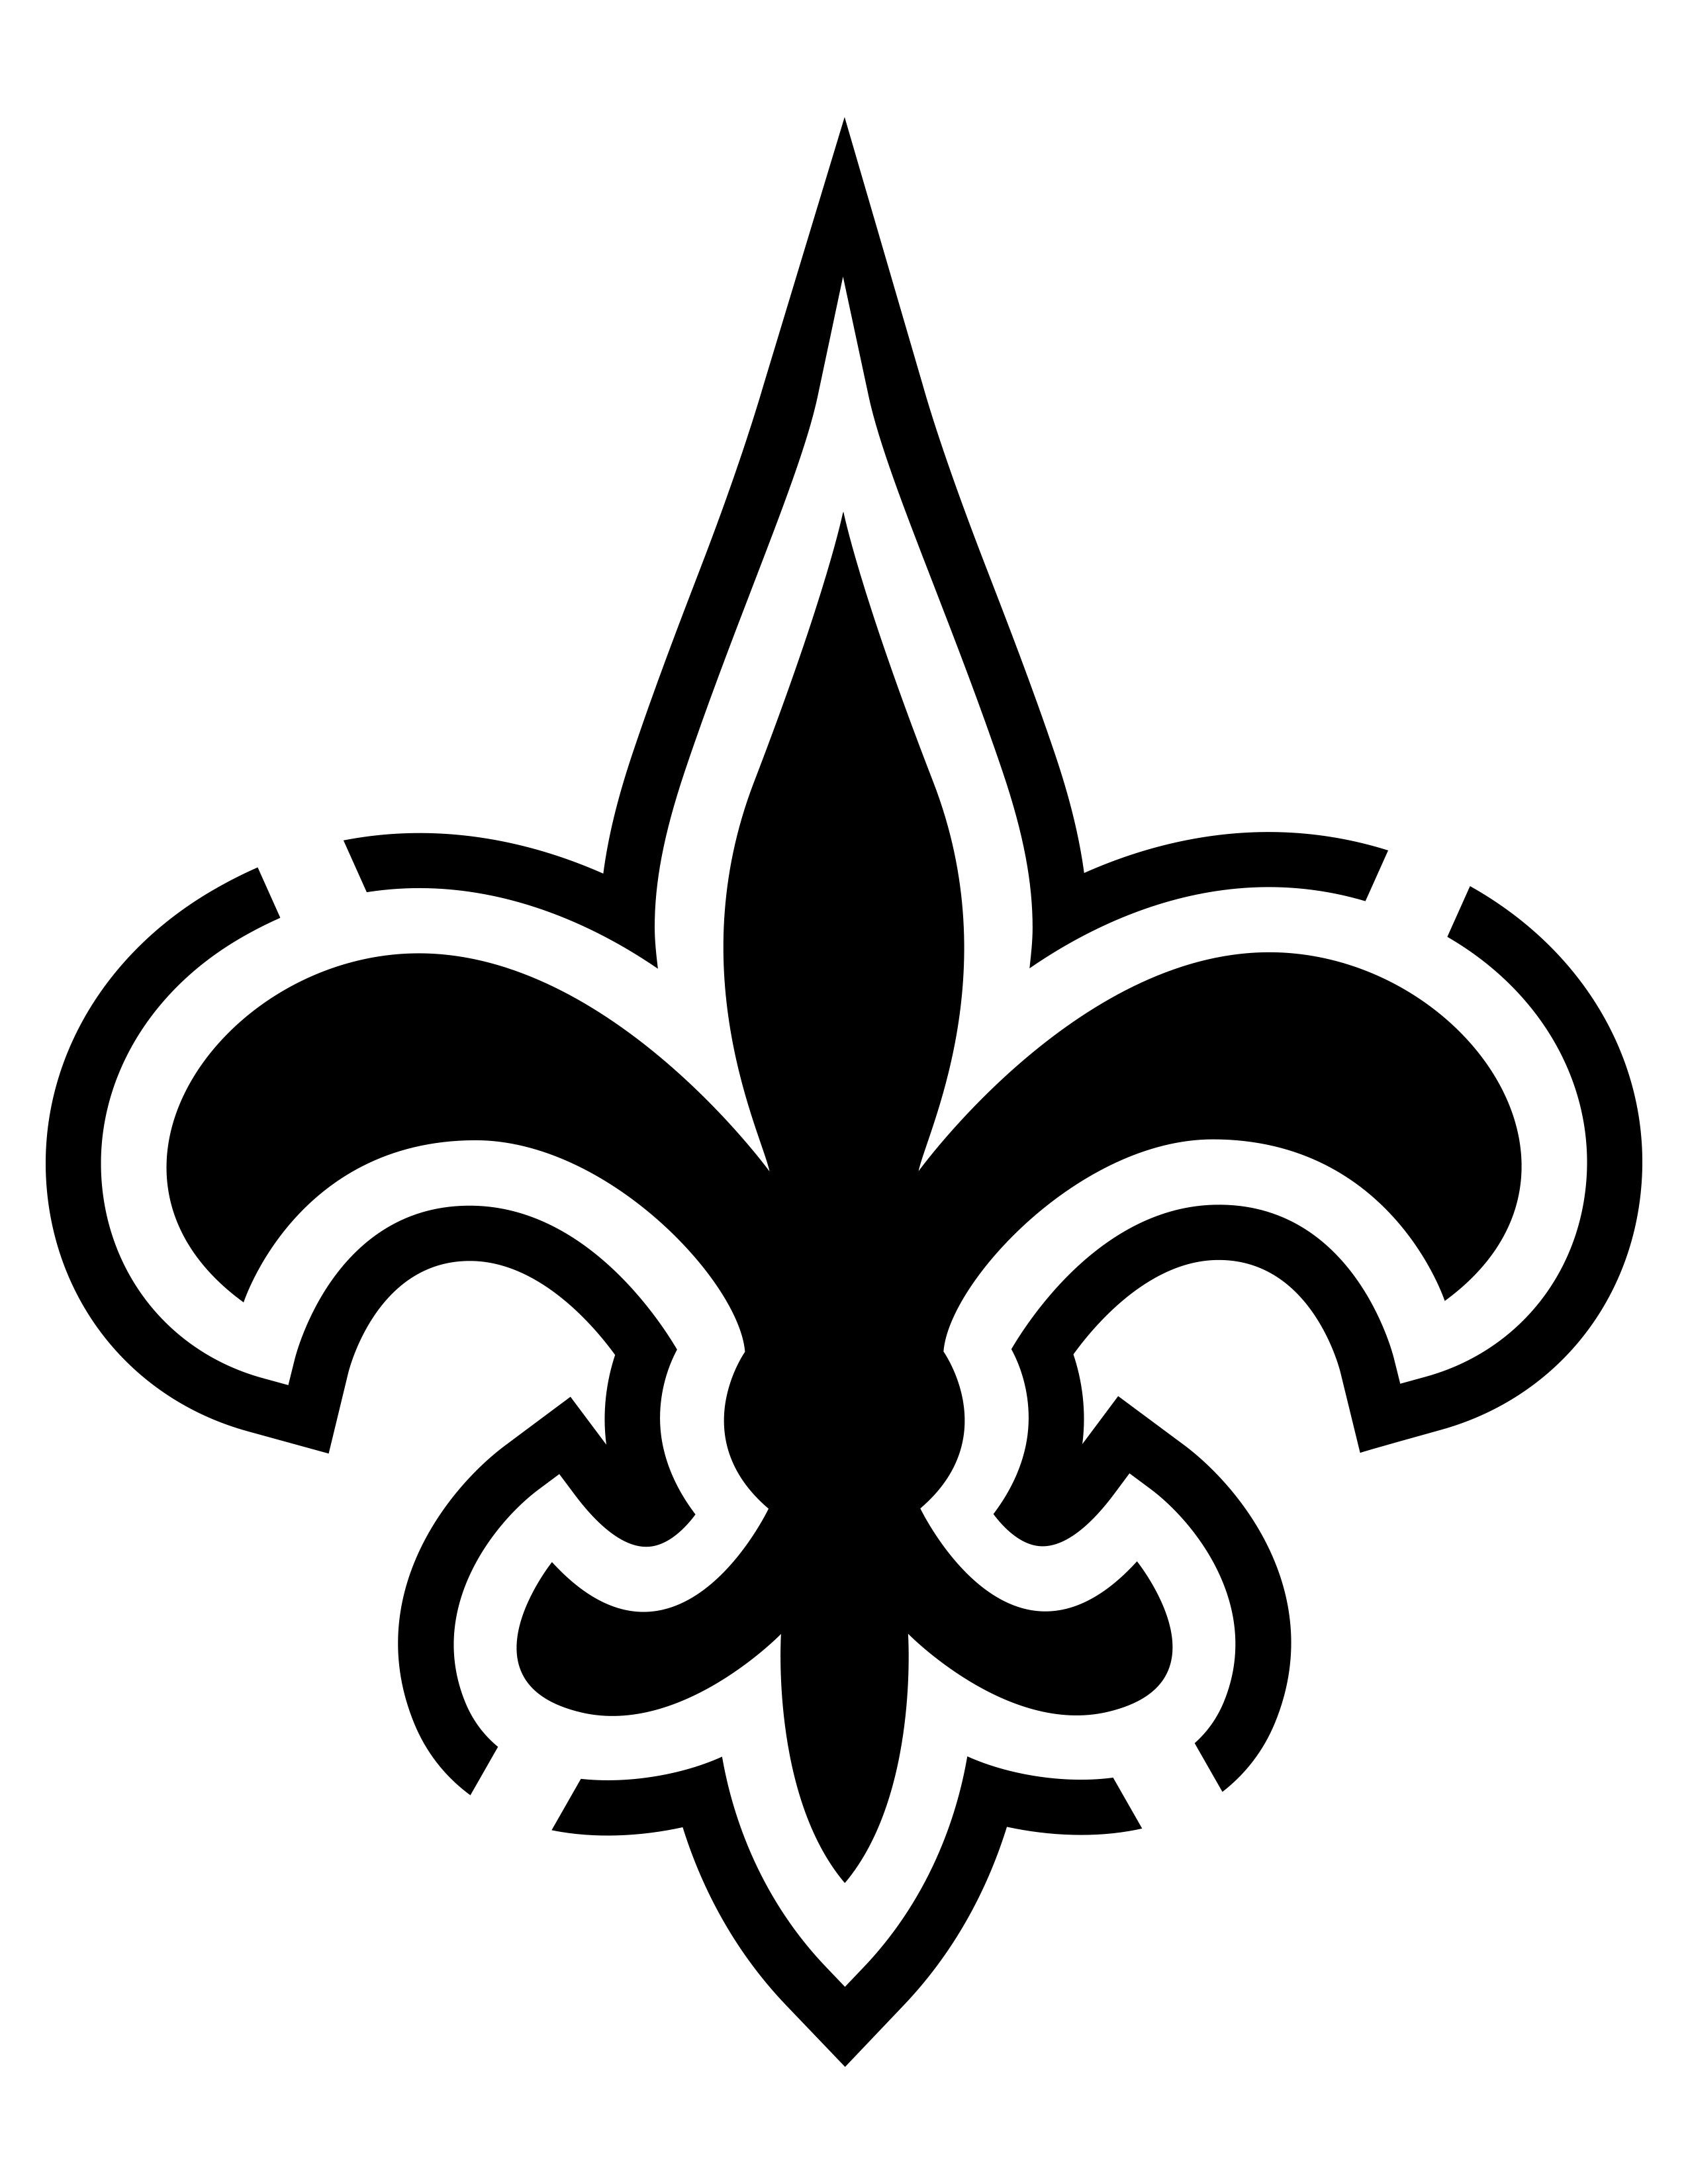 Image Result For New Orleans Saints Stencil | Scroll Saw Ideas - Printable Nfl Pumpkin Carving Patterns Free